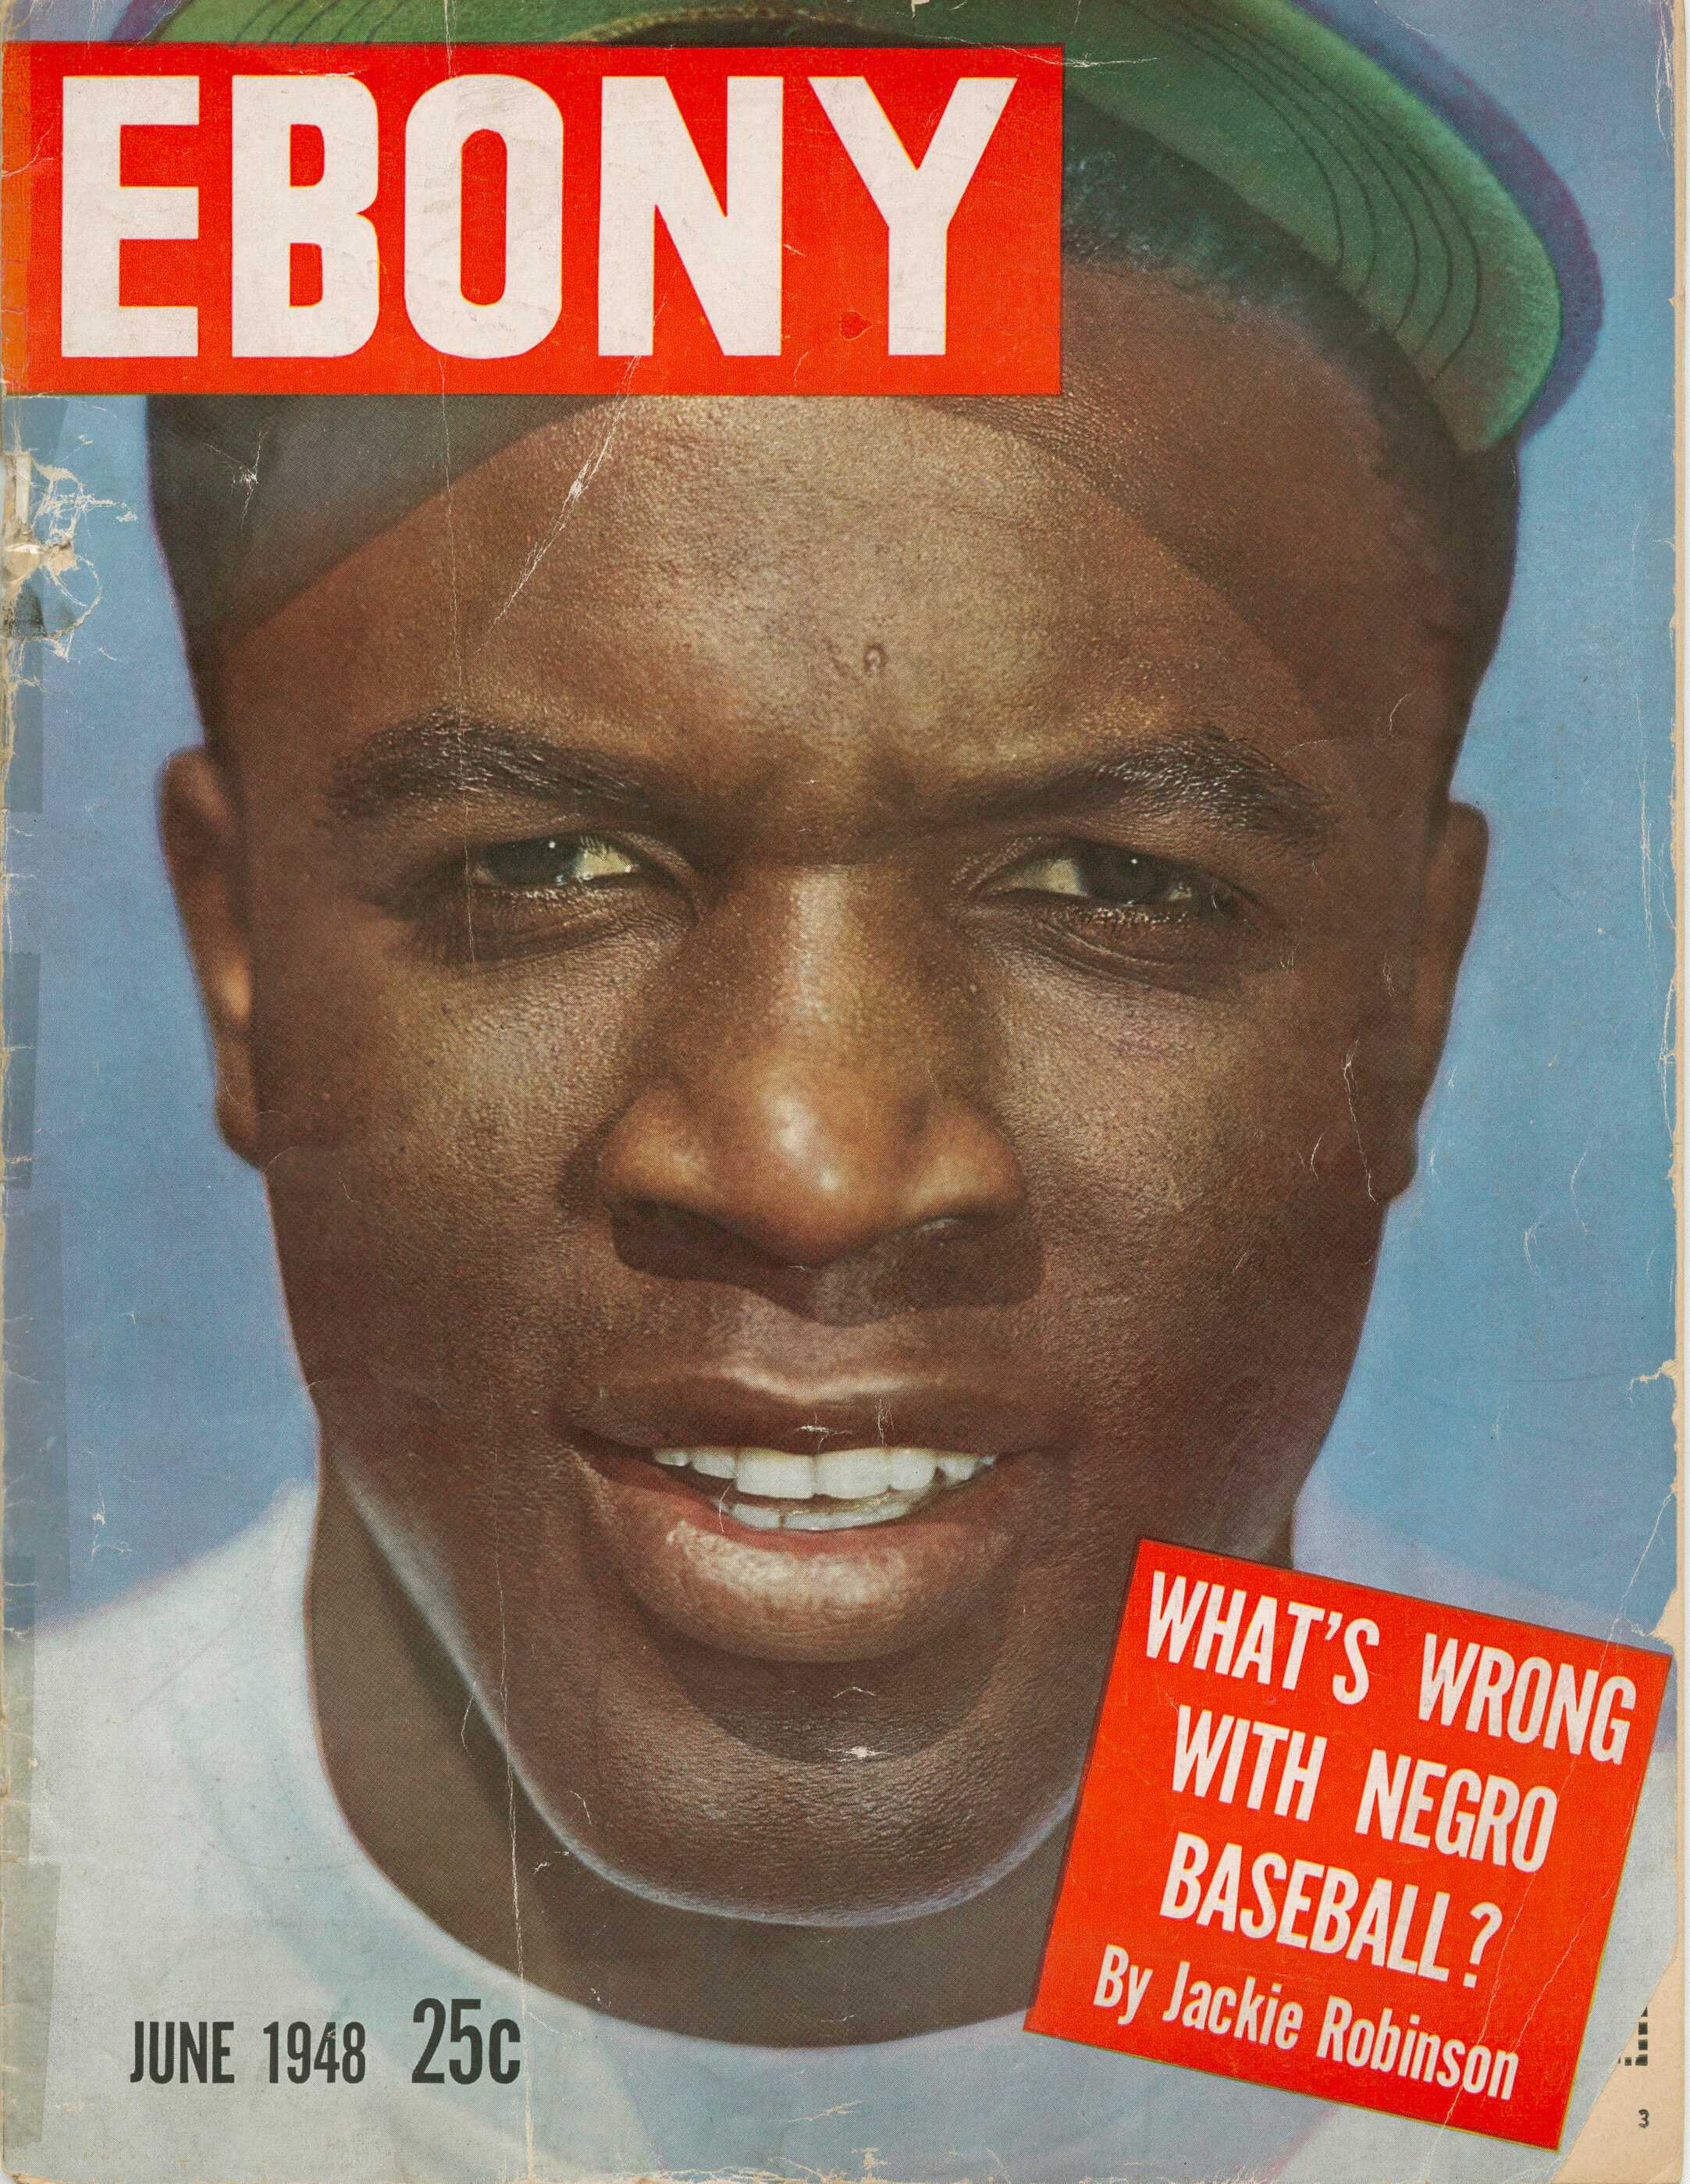 The June 1948 issue of Ebony magazine featuring a cover story written by Jackie Robinson.